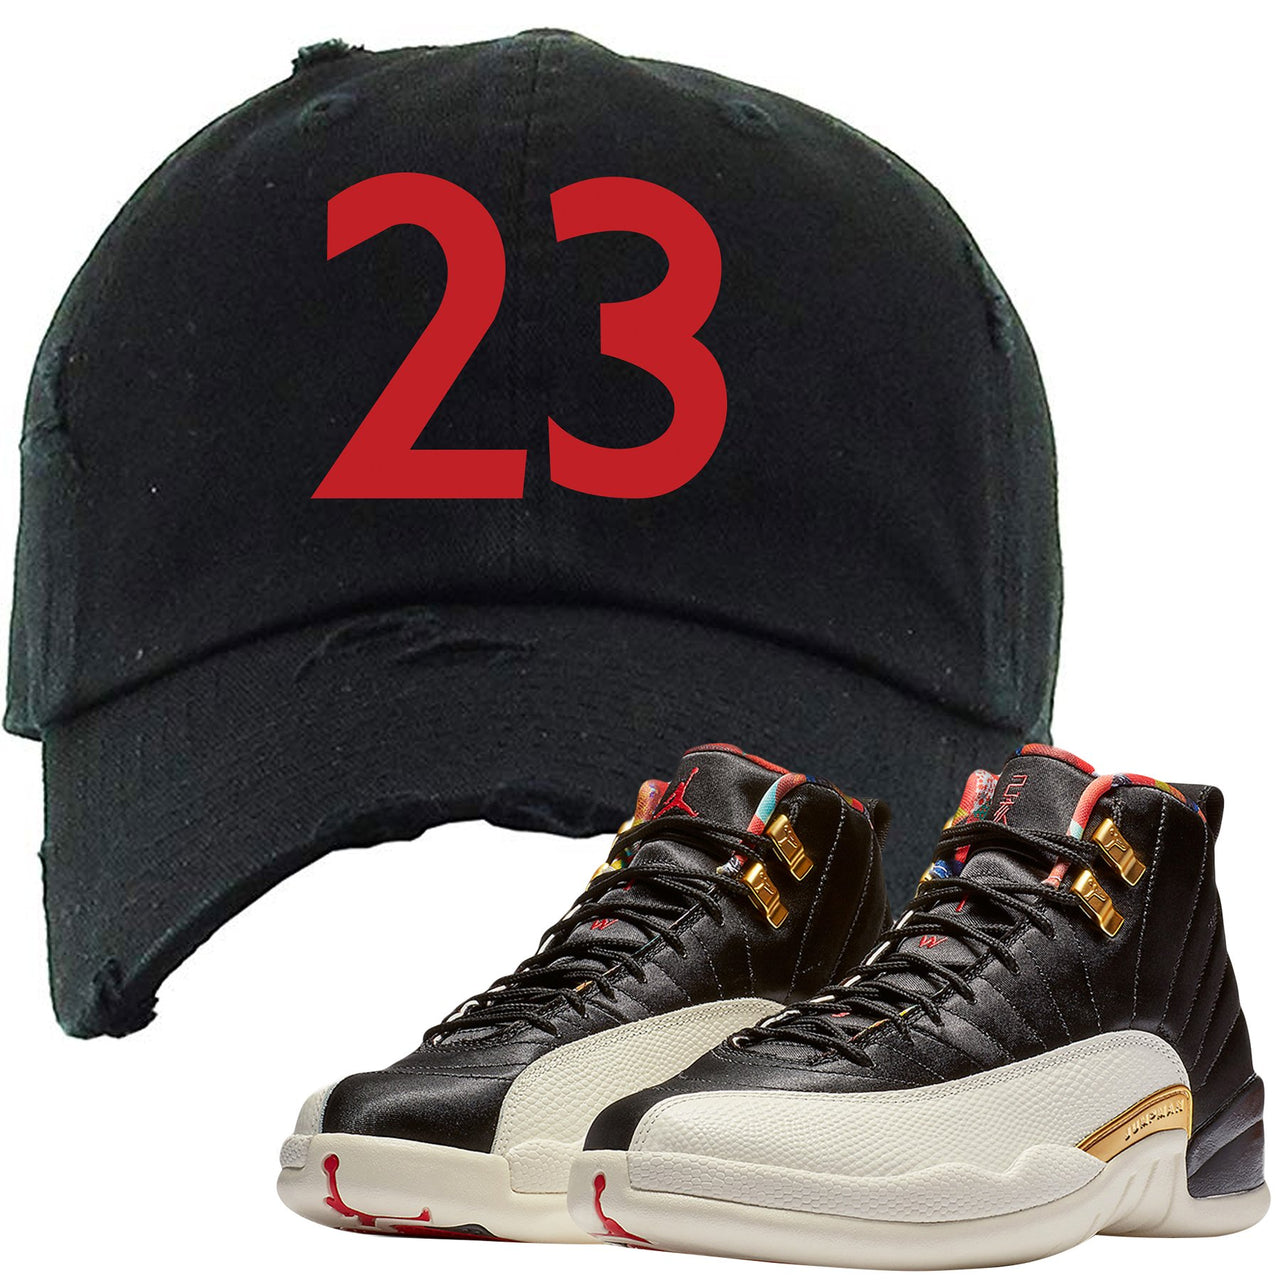 Rock the Jordan 12 Chinese New Year sneaker matching distressed dad hat to match your pair of Chinese New Year 12s